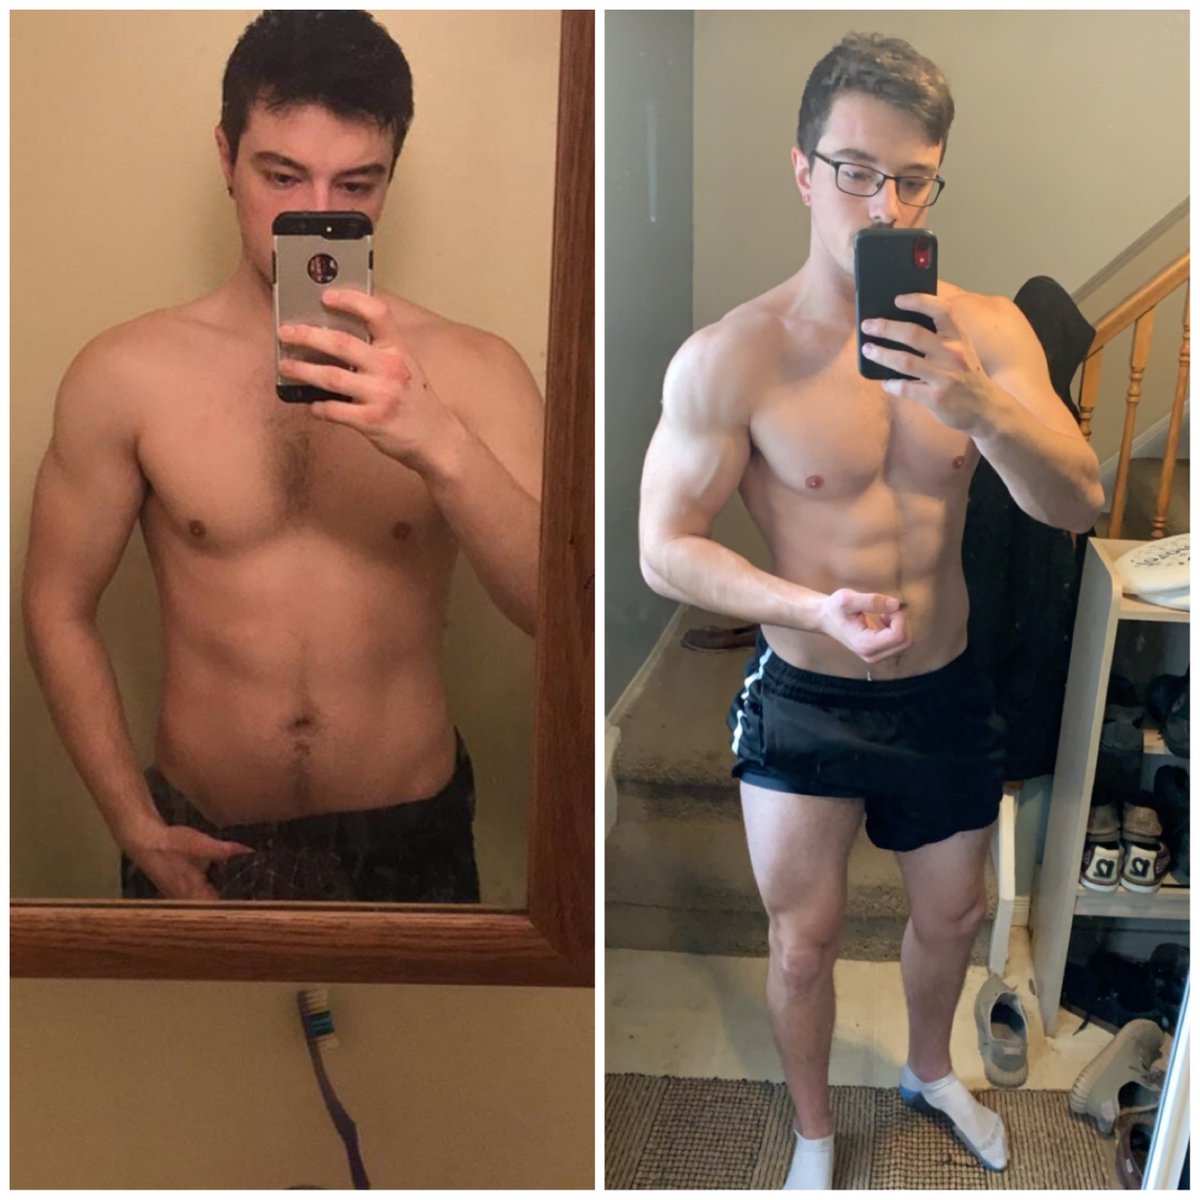 11. So... to give you first-hand proof that intermittent fasting changed my life, here is a before and after of me 9 months difference. I feel like a million bucks. No more bloating or cravings.All thanks to IF dieting pattern and resistance training